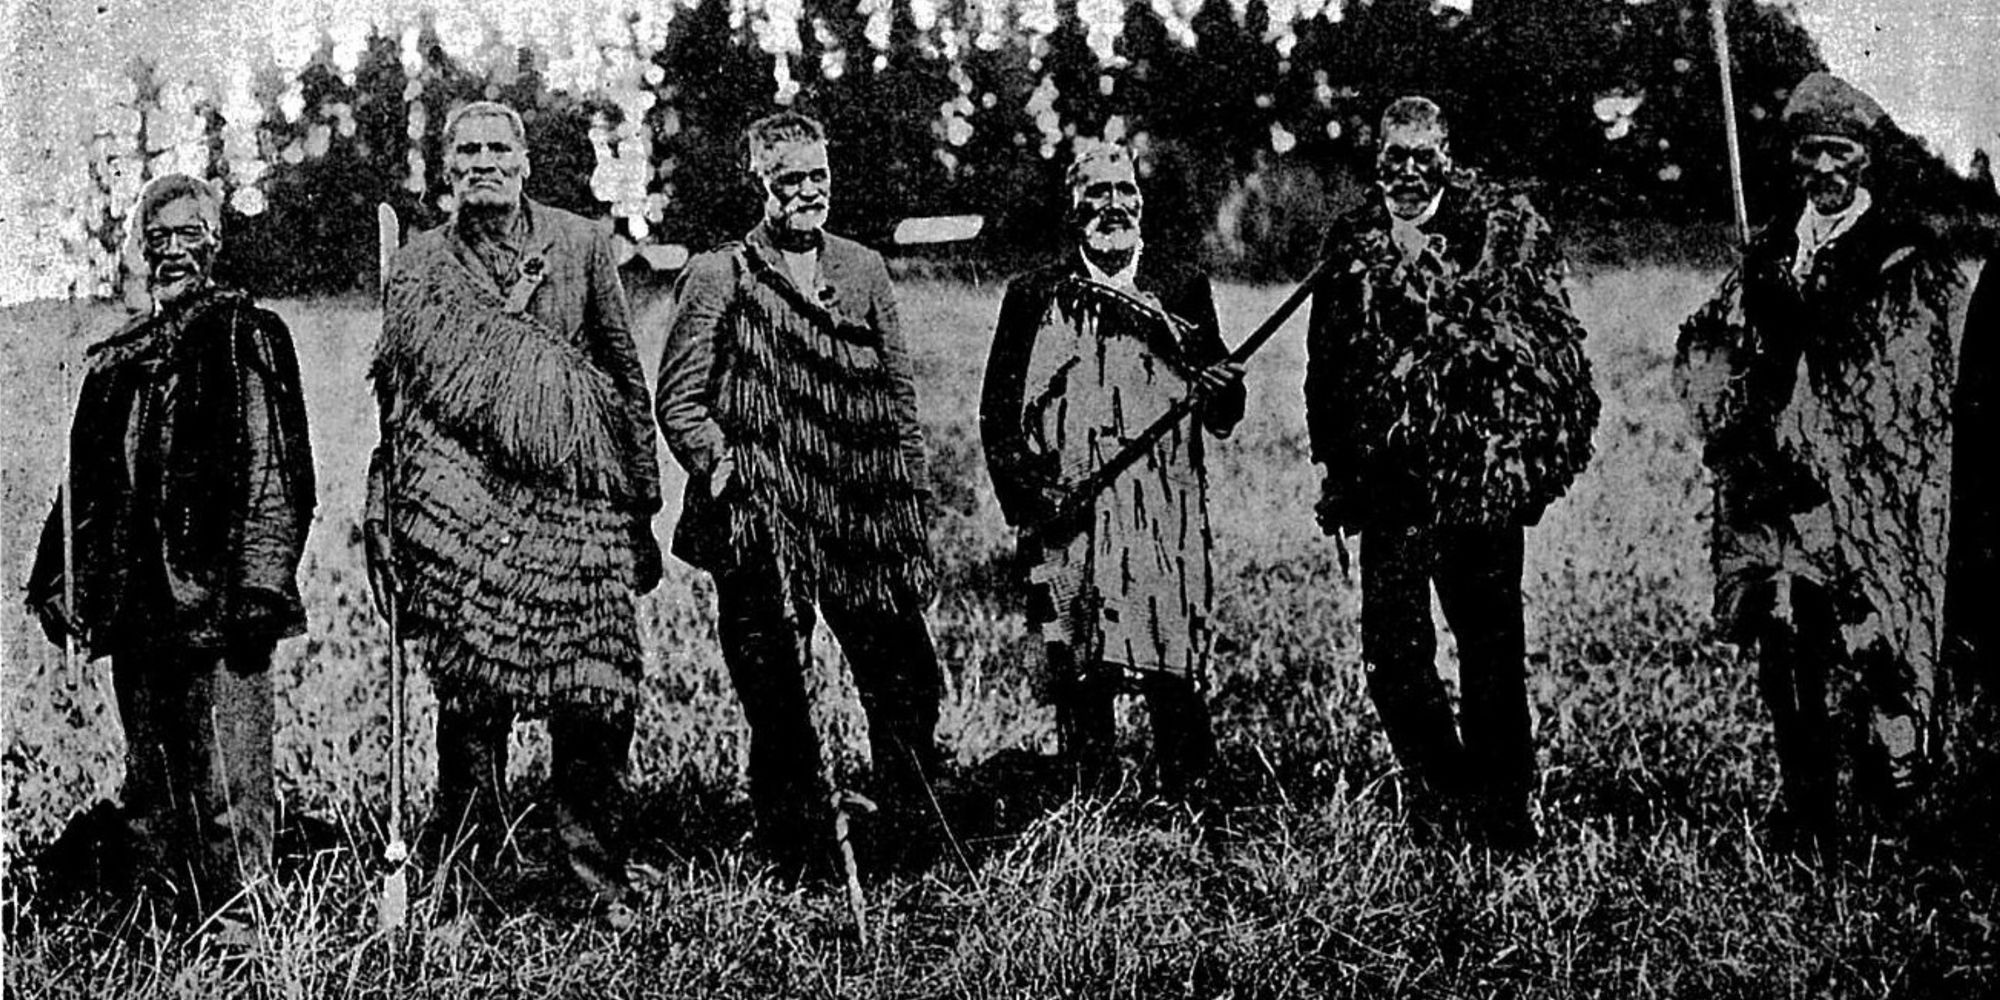 Ngati soldiers ready for battle against the British